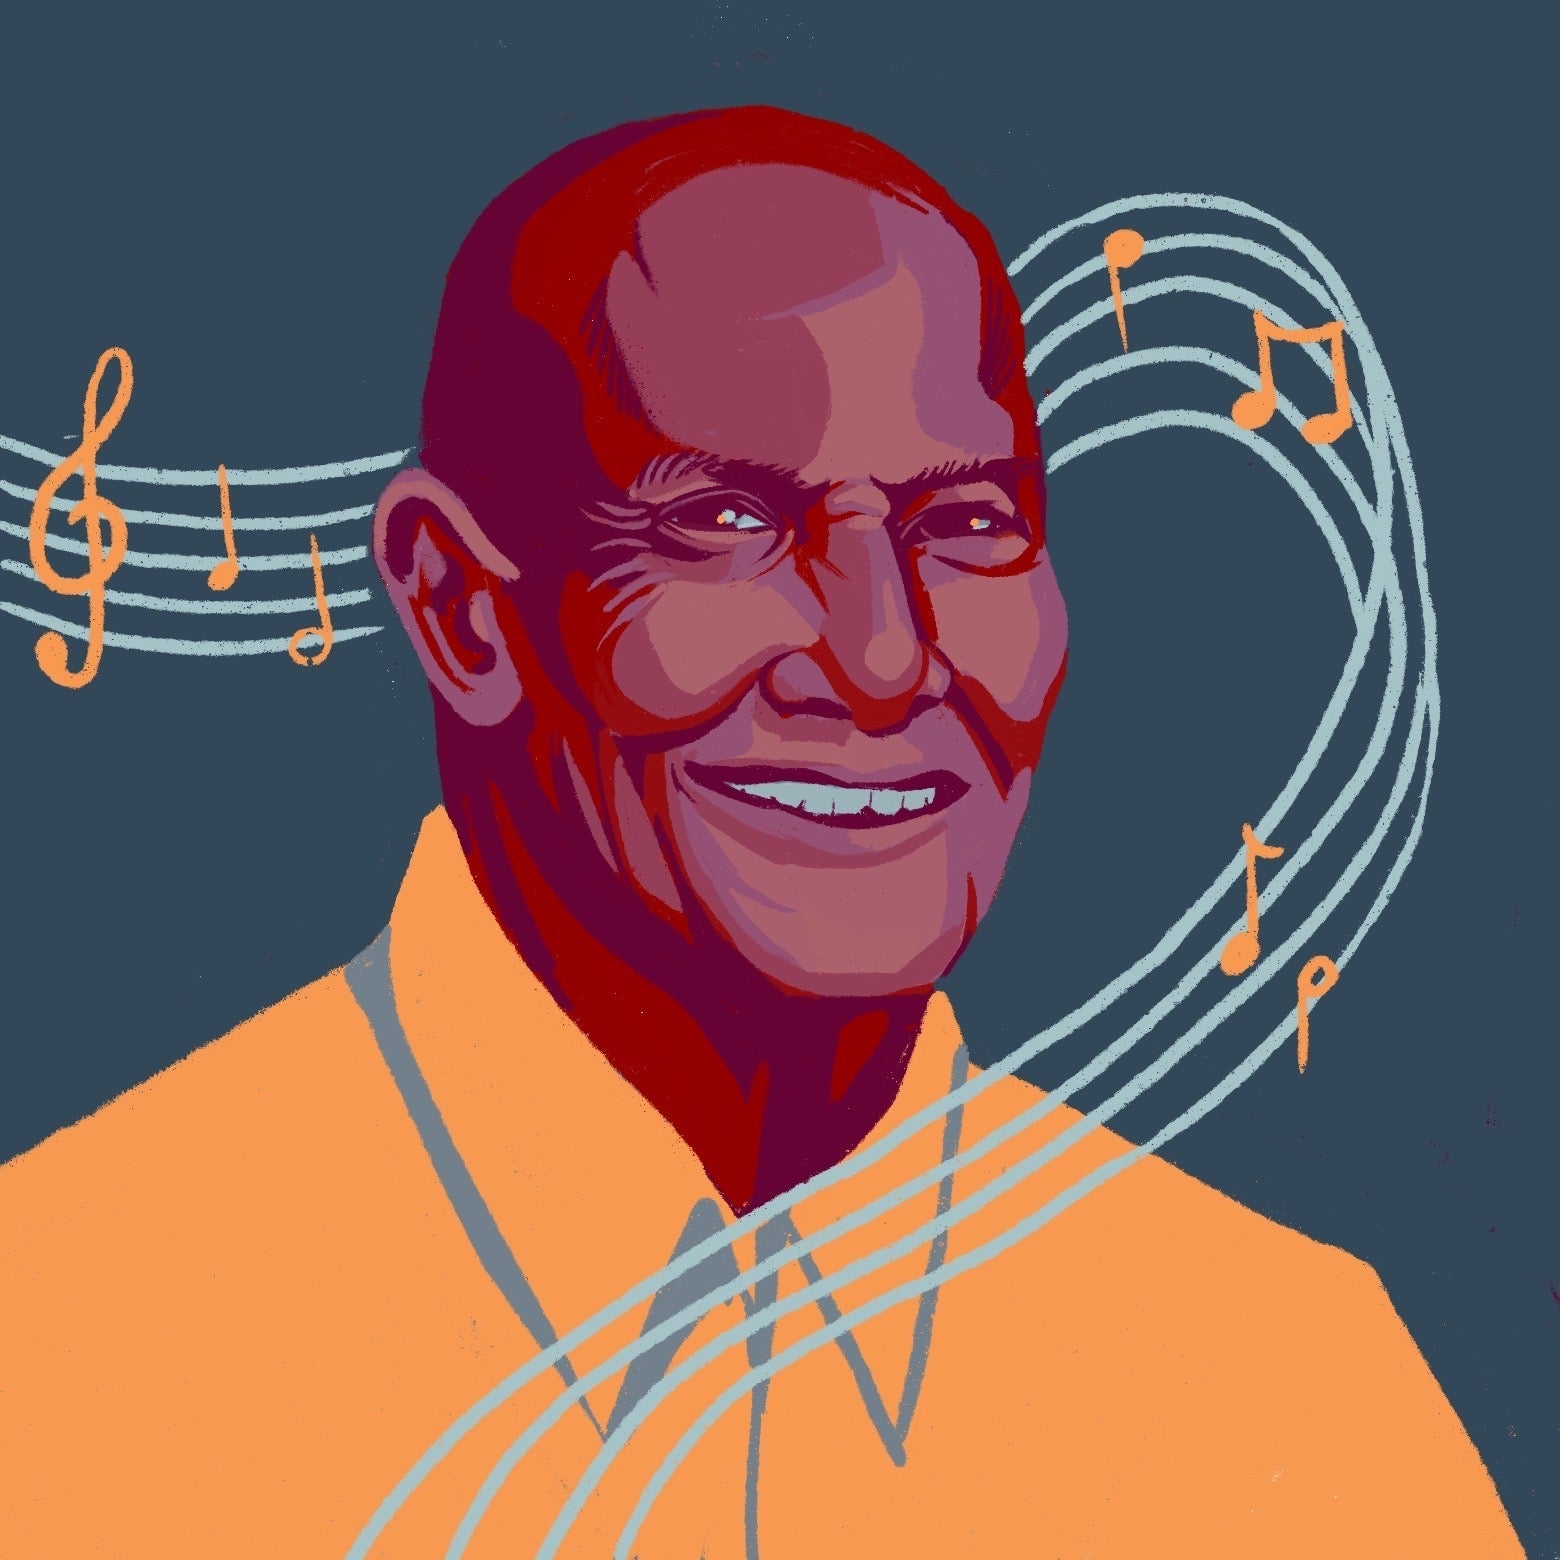 Harry Belafonte is enveloped by a musical staff featuring a treble clef.